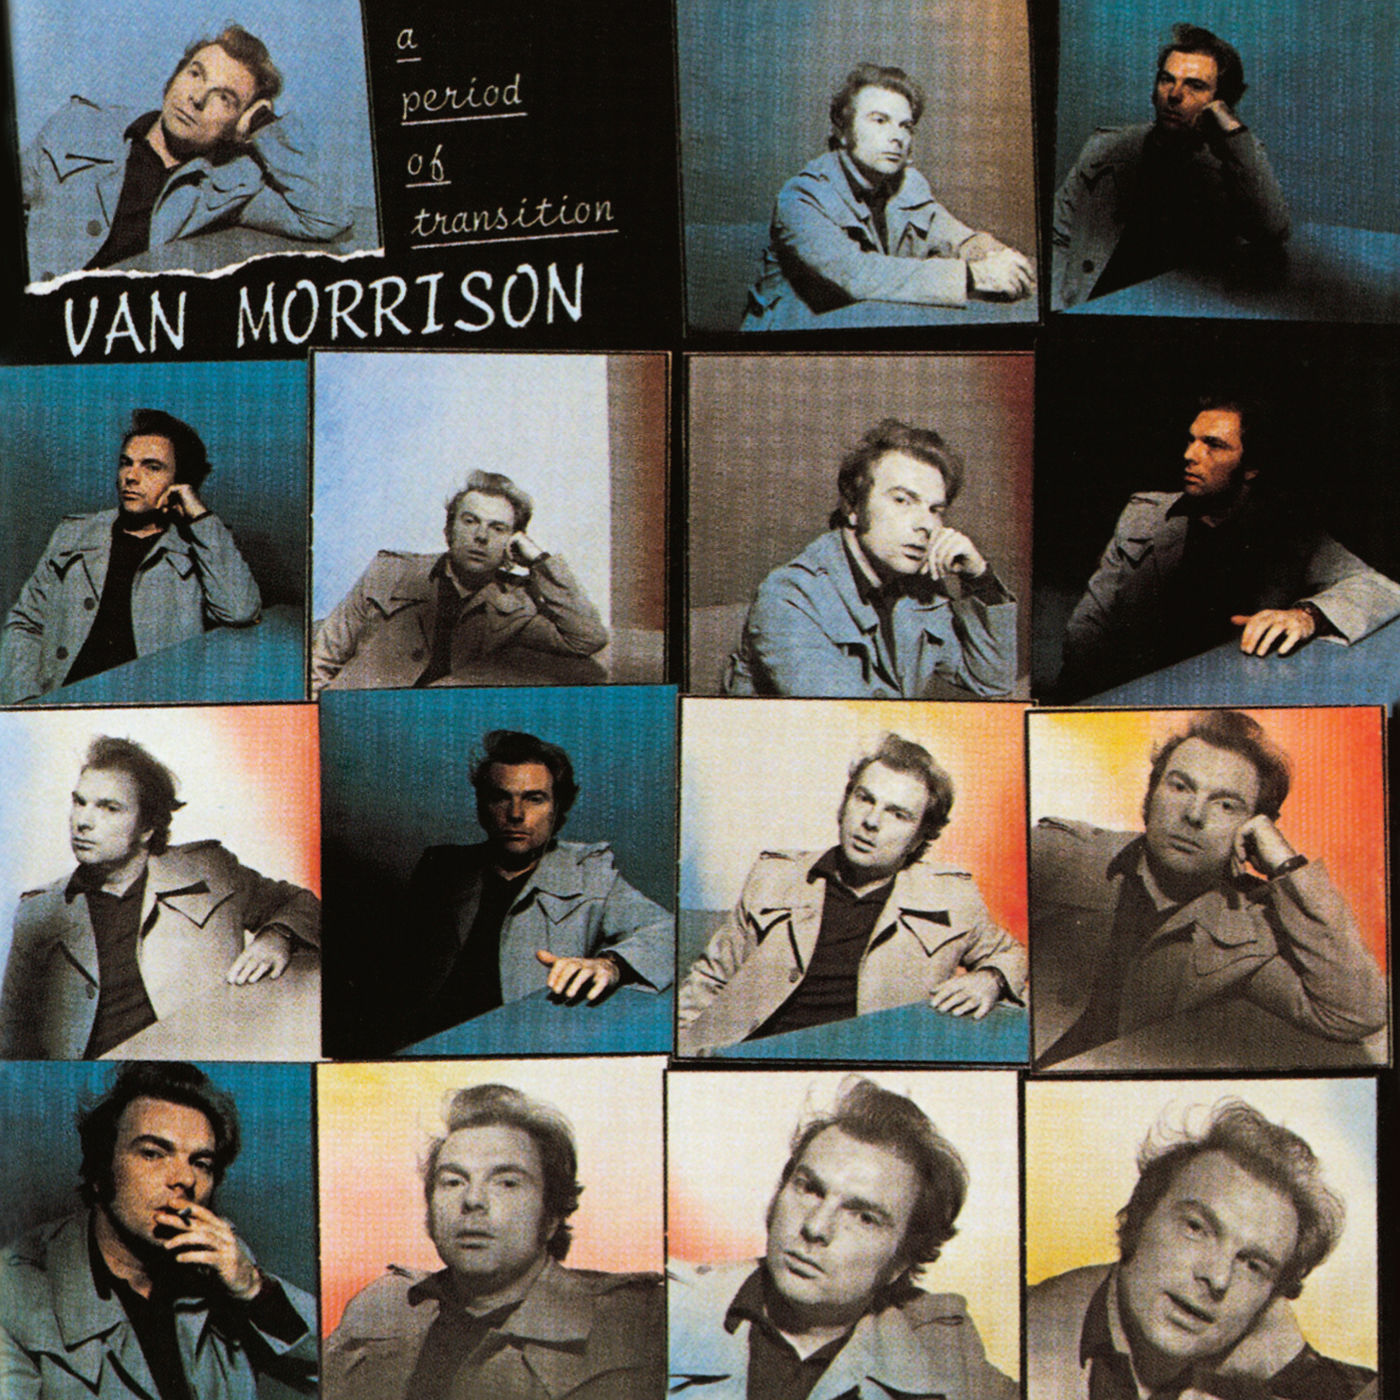 Van Morrison - 1977 - A Period Of Transition [2020] 24-96